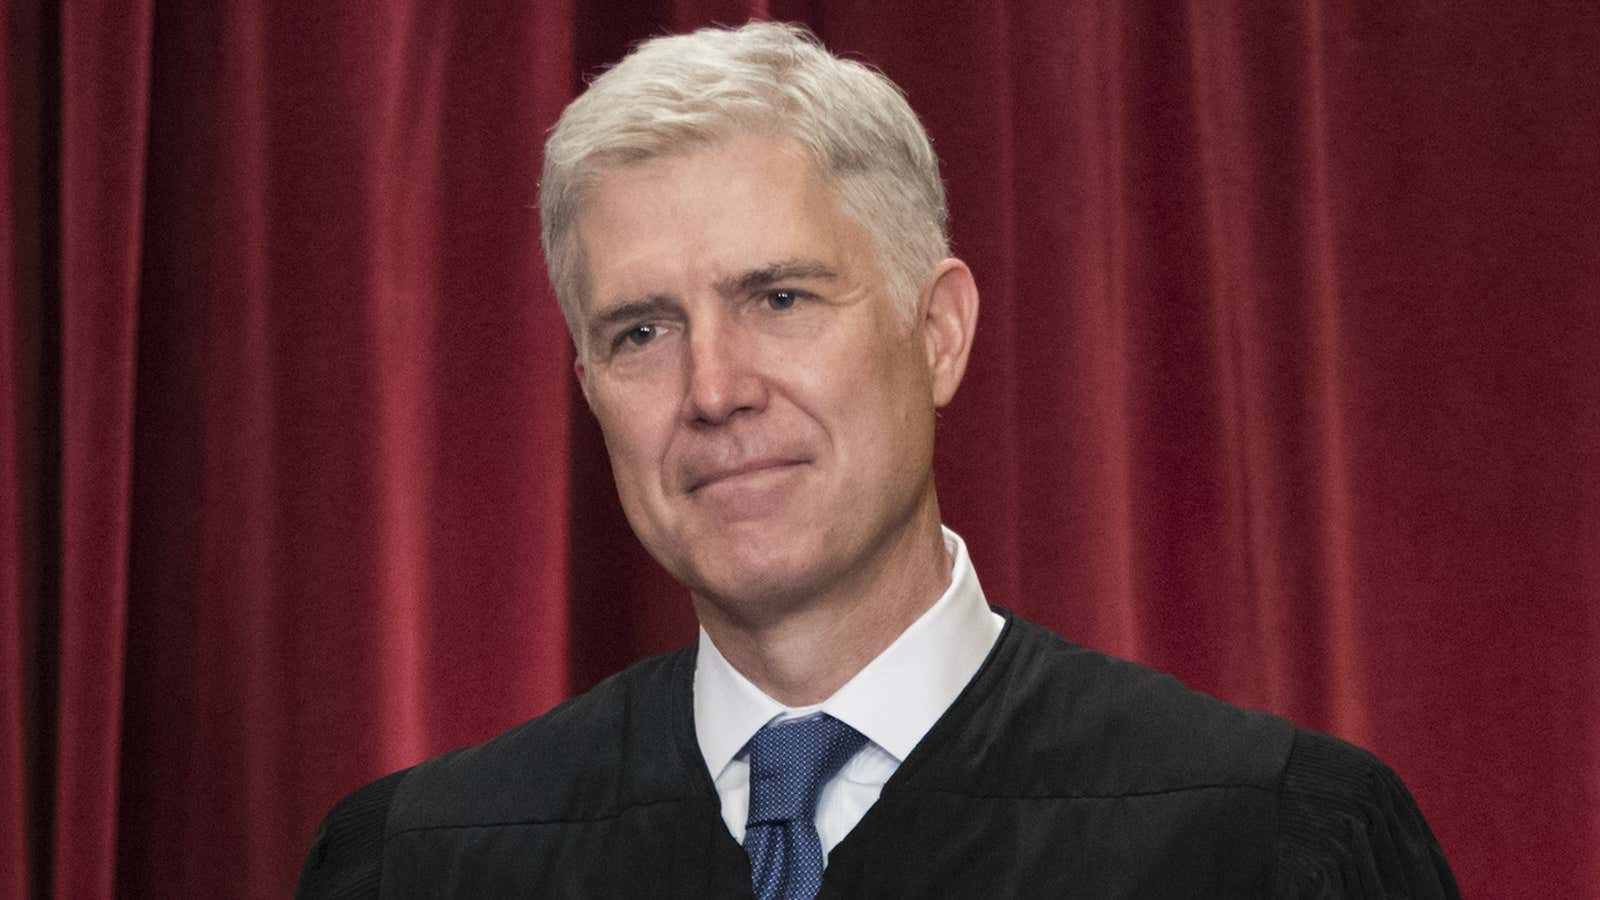 Gorsuch’s stances on the travel ban, LGBT parents’ rights, and gun laws say a lot about what’s to come.